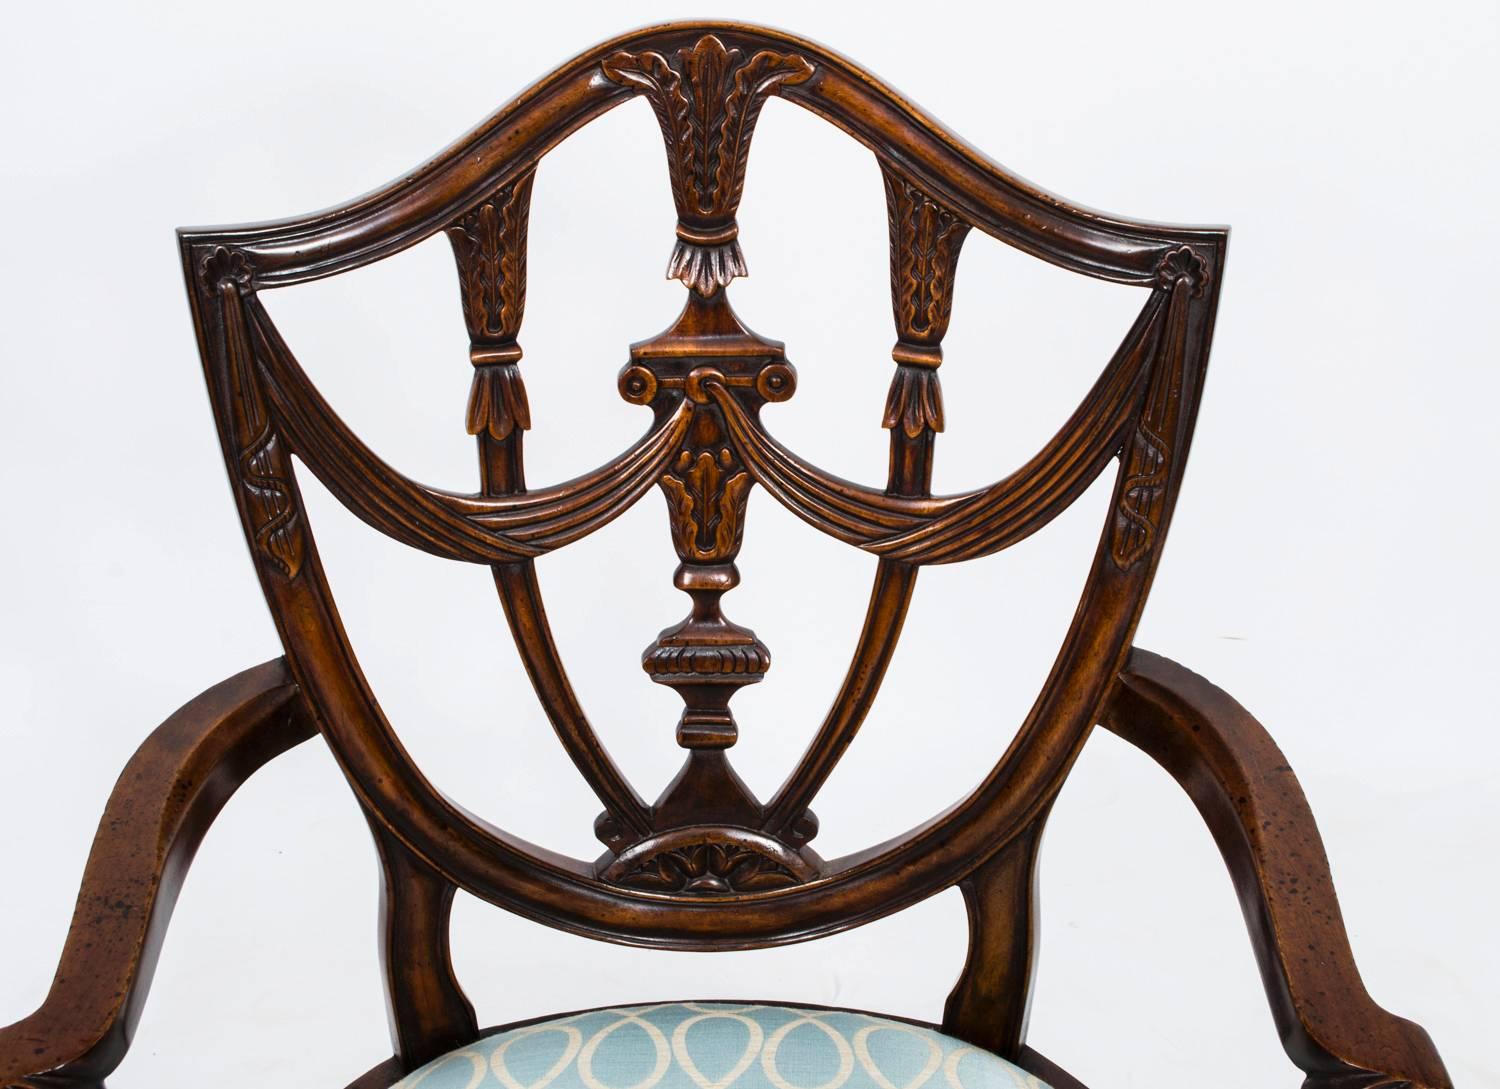 federal style dining chairs